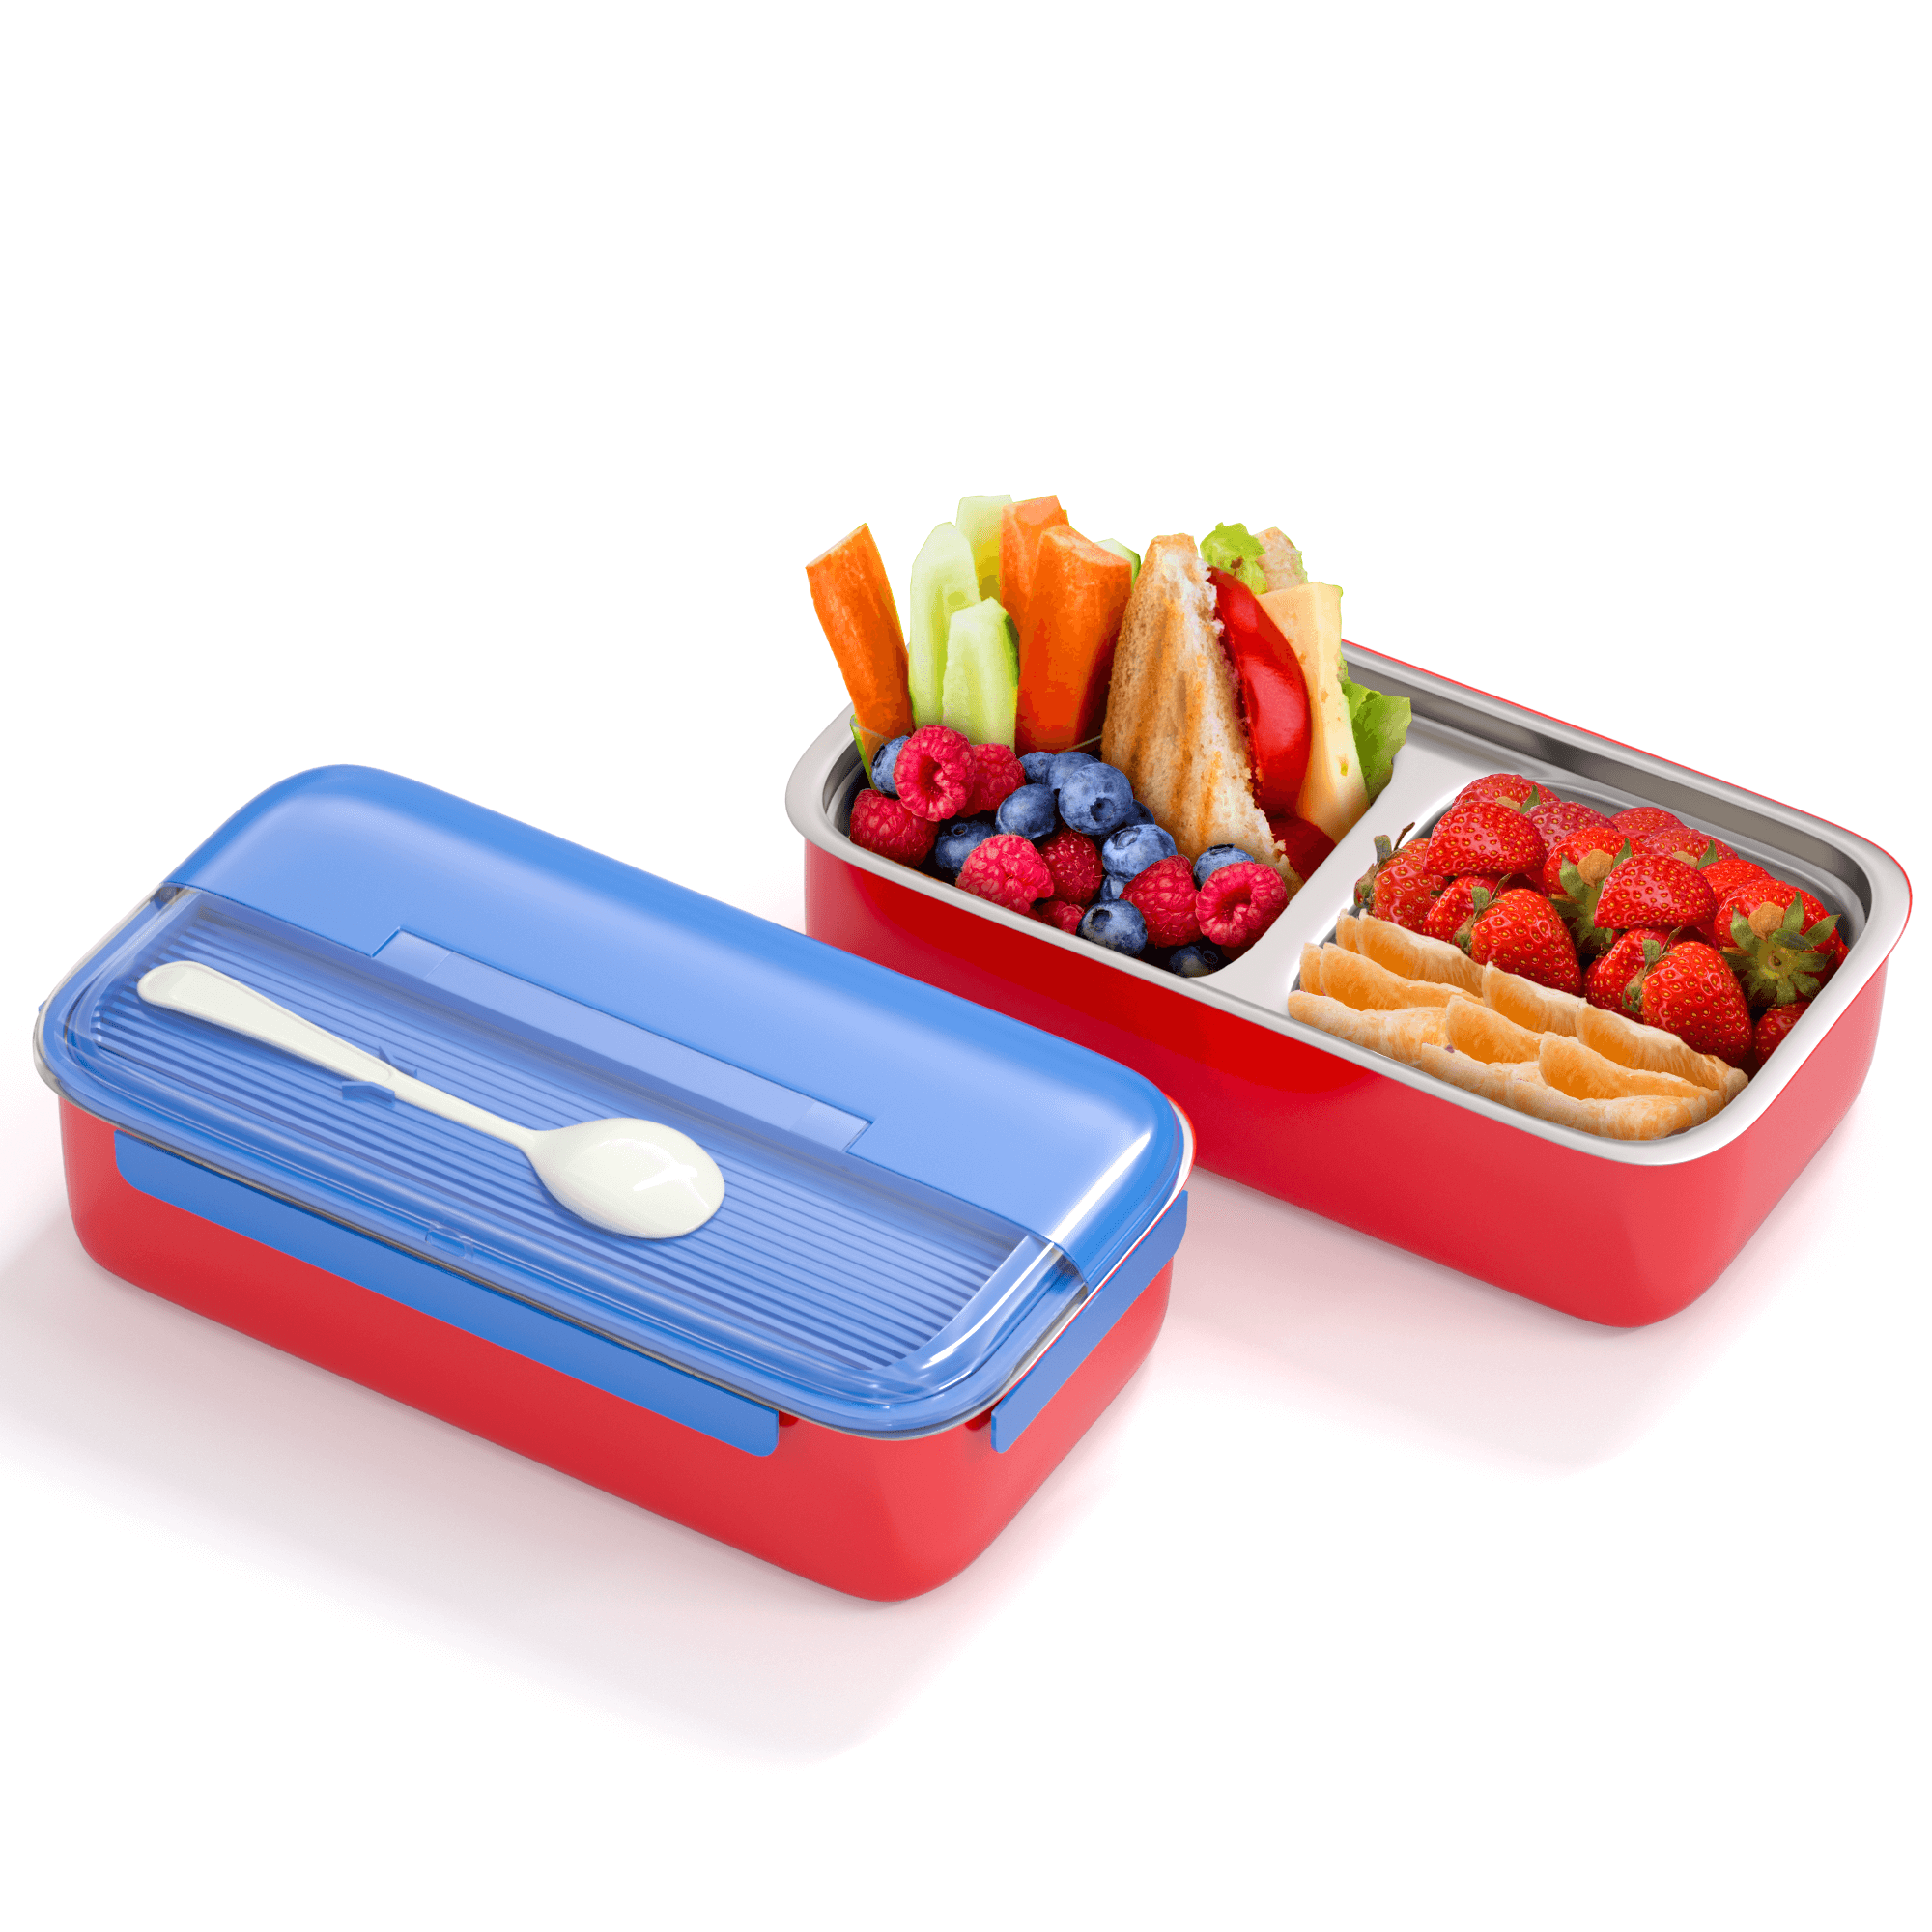 4 Compartment Lunch Box Stainless Steel Tiffin Box For Boys, Girls, School & Office Men. (Pink), 900 milliliter